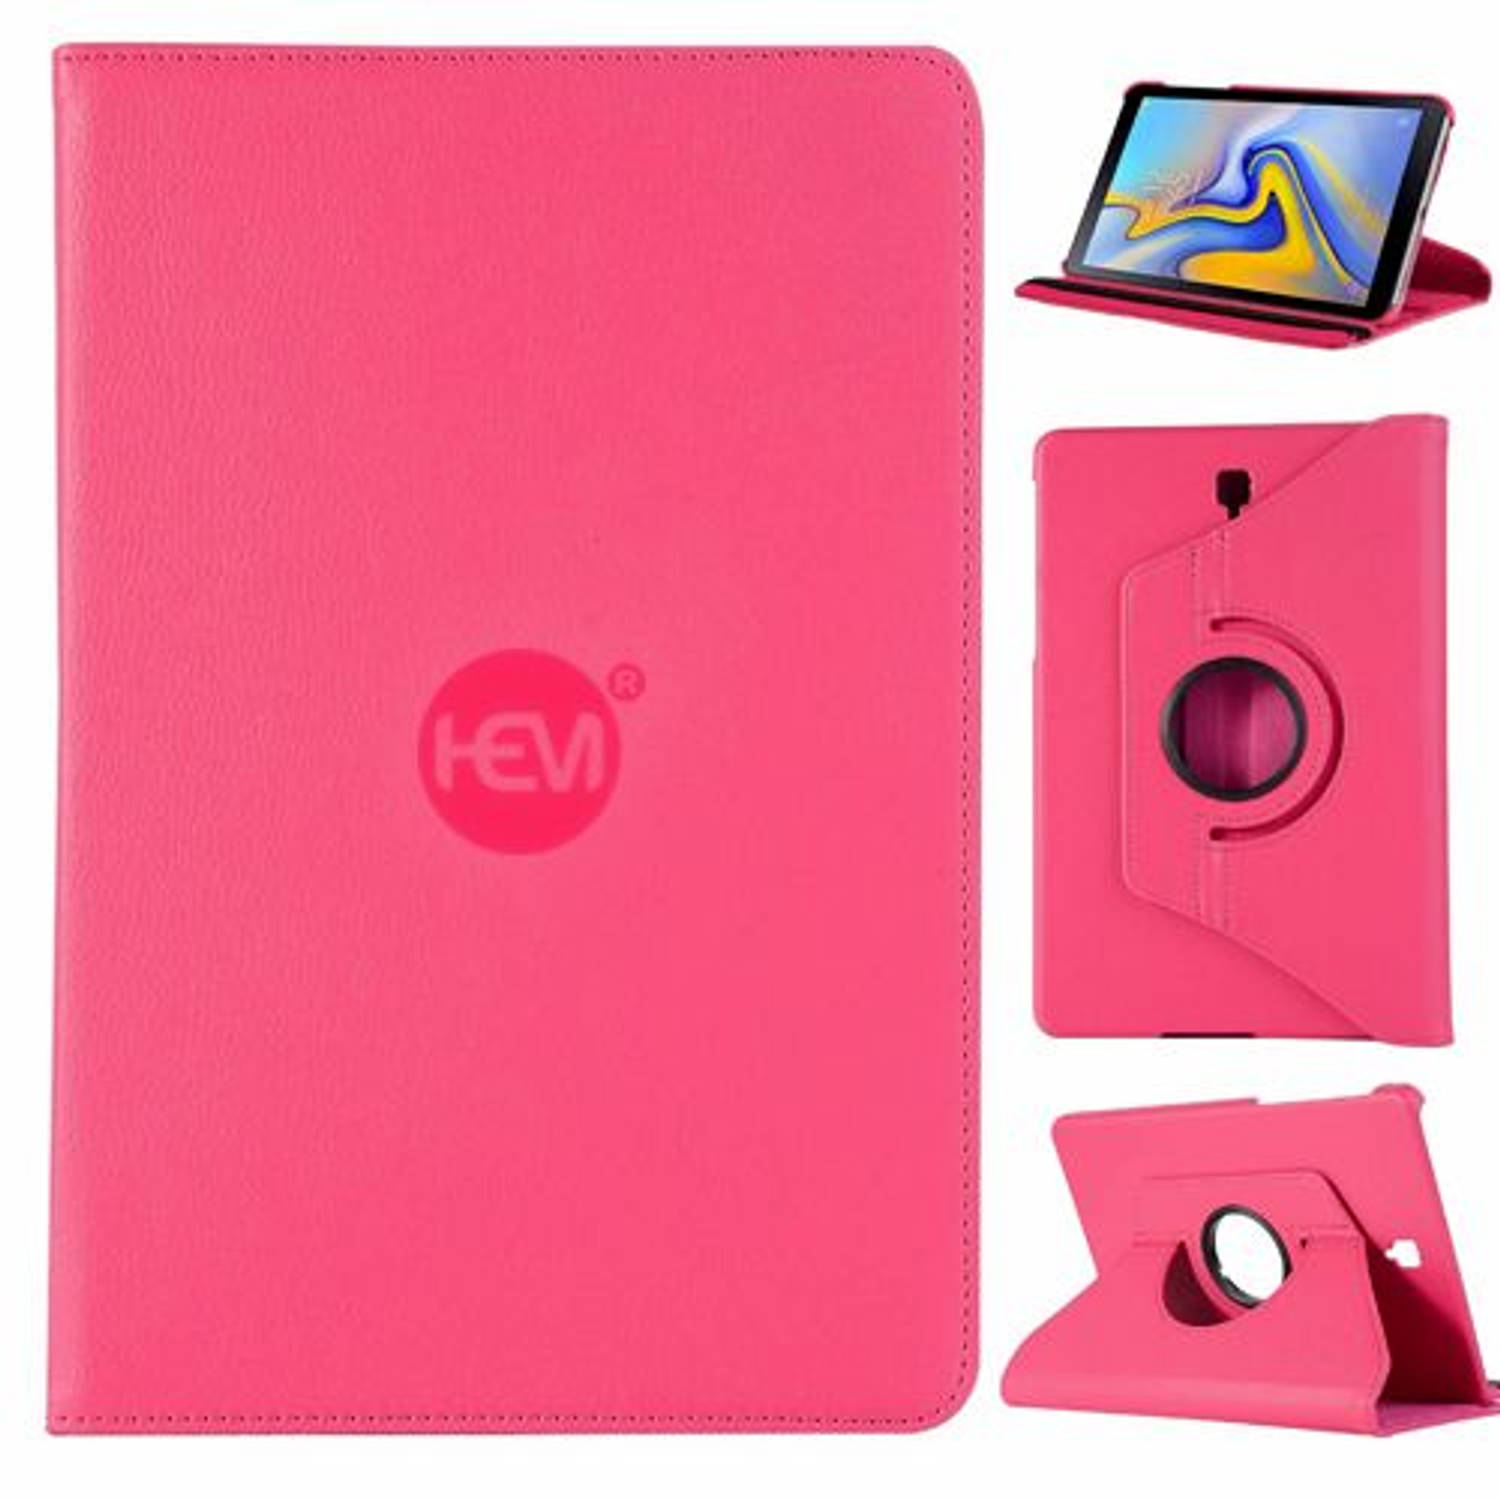 Samsung Galaxy Tab A 10.1 (2019) Cover Donker Roze - Ipad hoes, Tablethoes